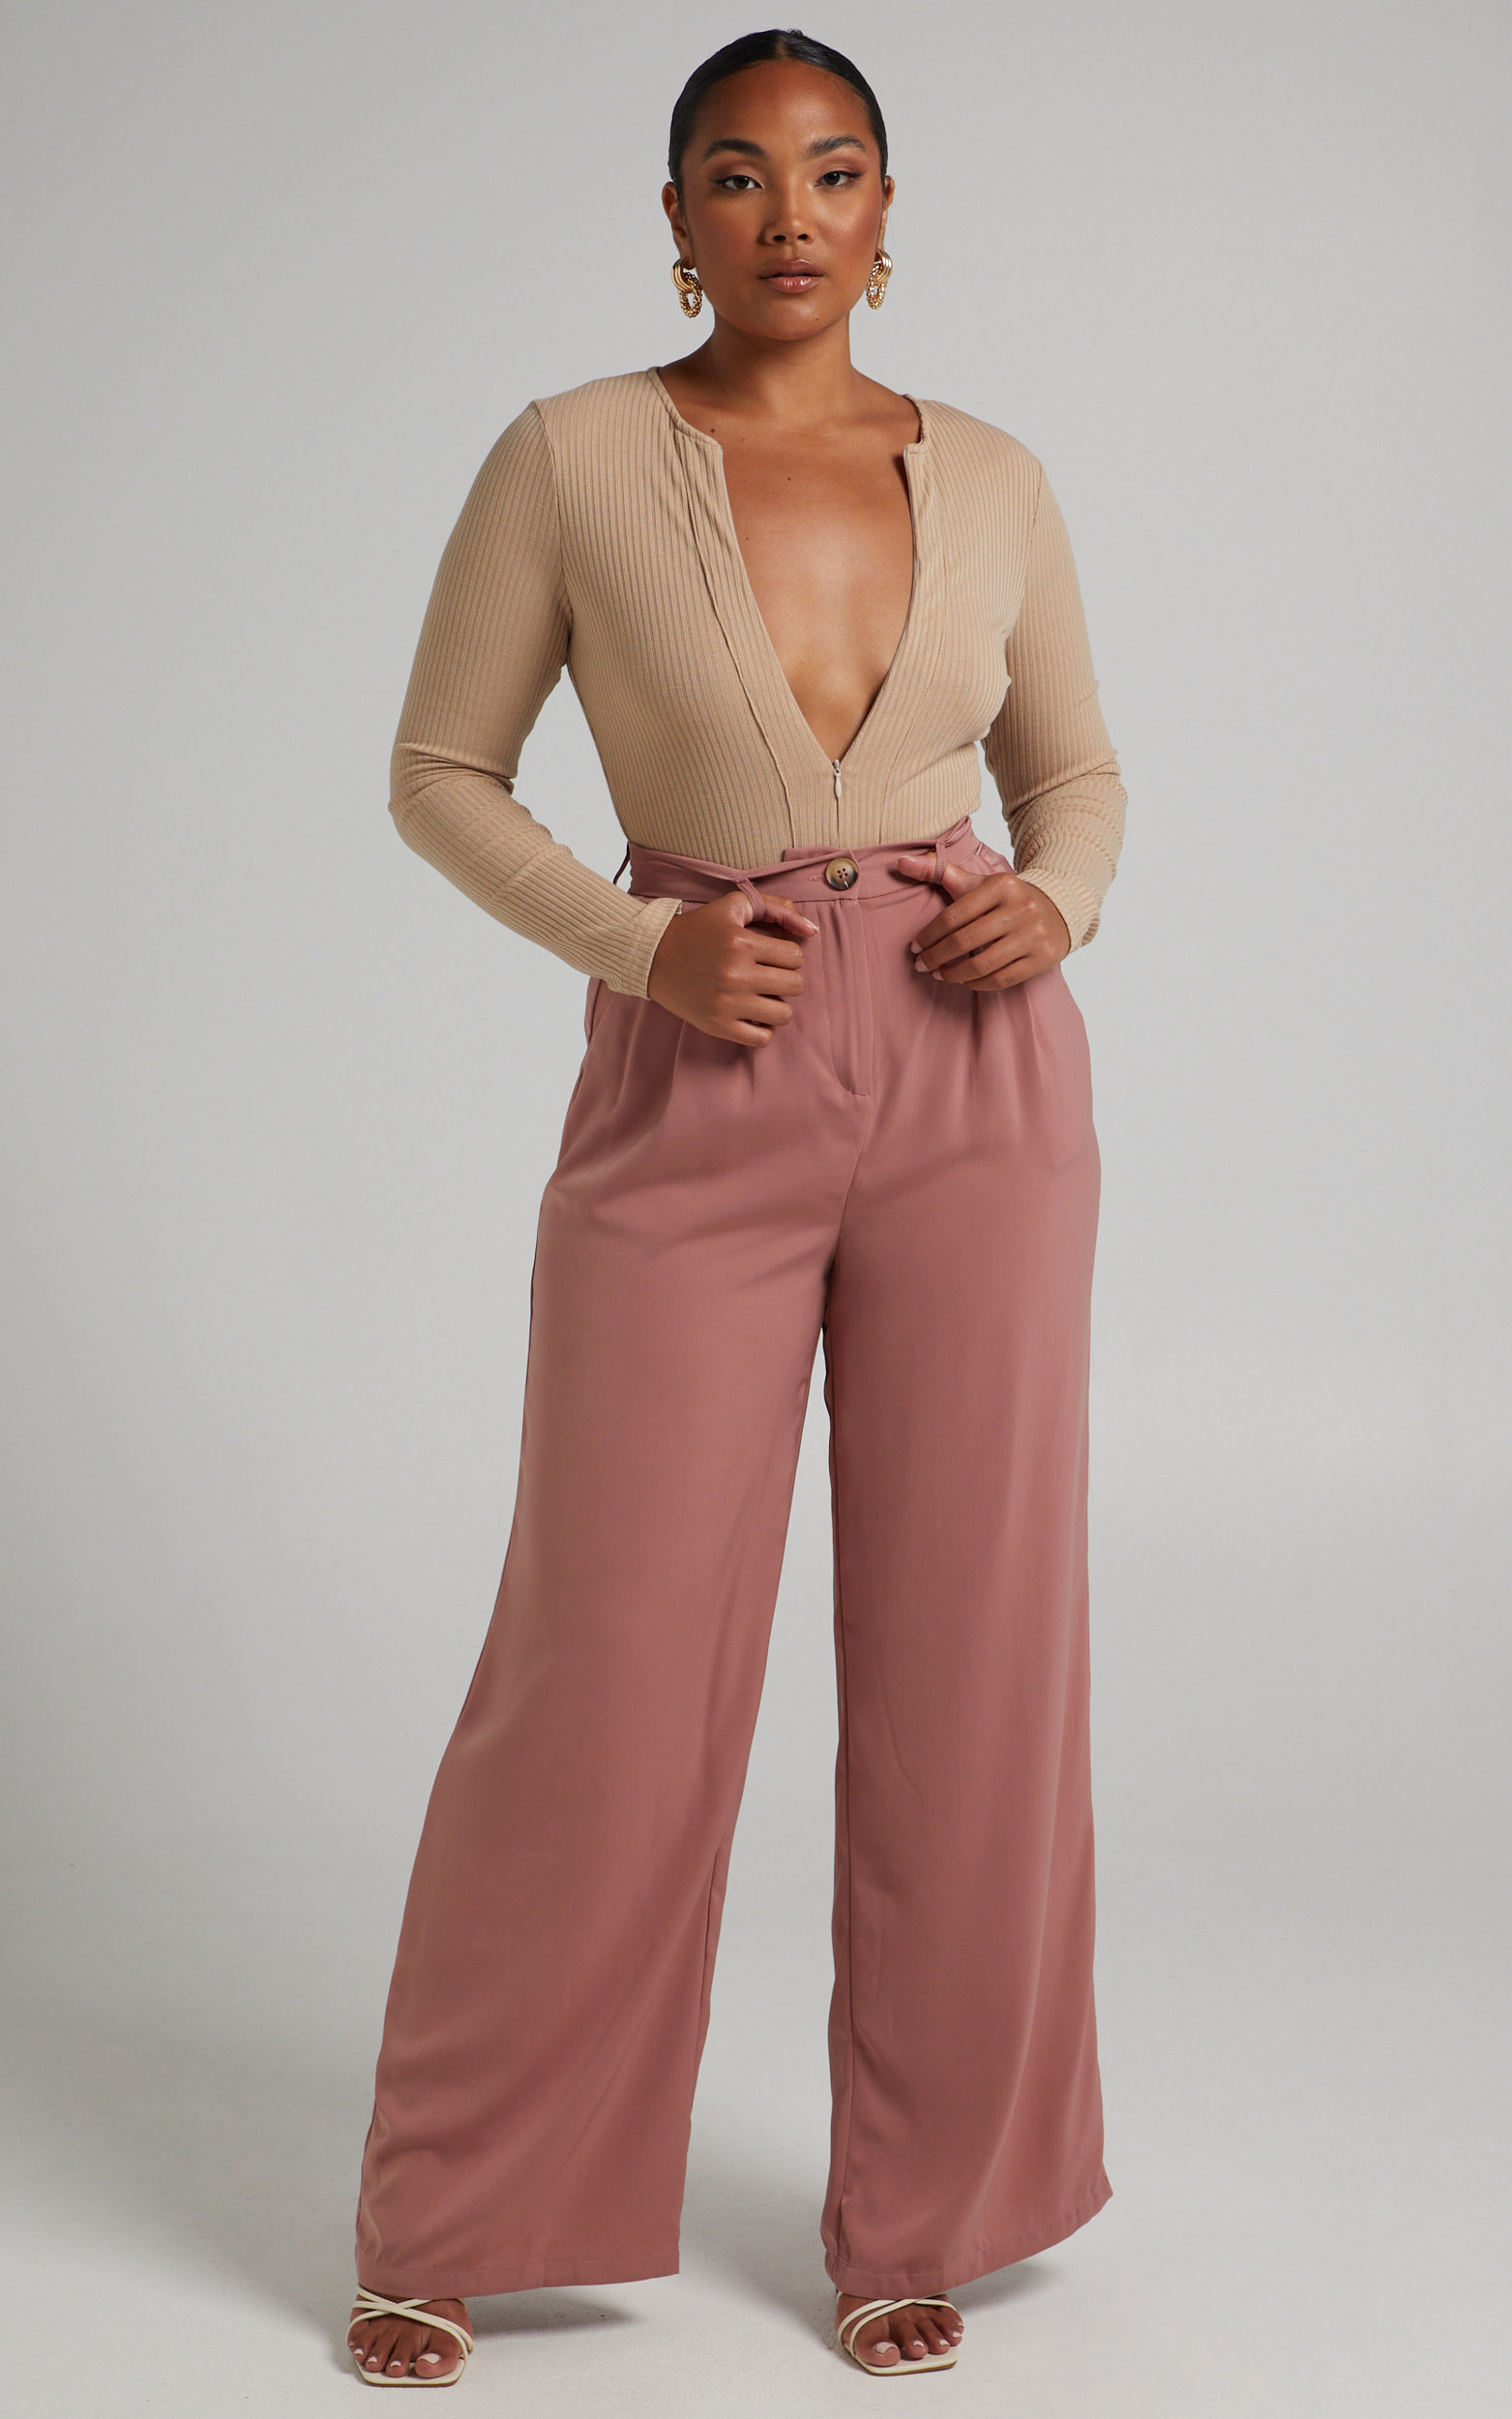 Zachy tailored pants in Taupe - 04, BRN1, hi-res image number null